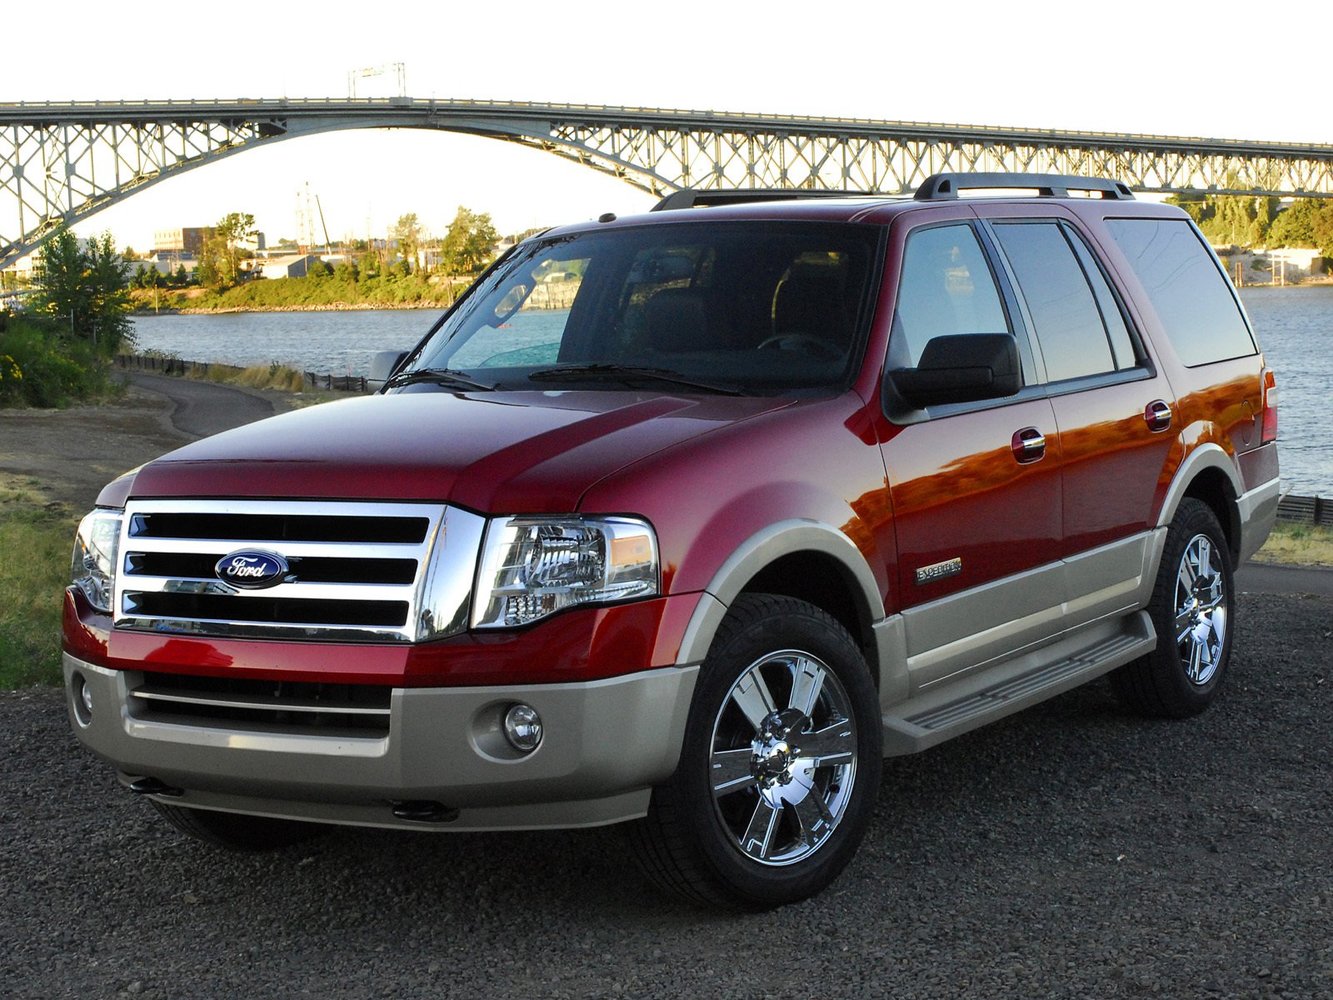 Ford Expedition 2006 - 2014